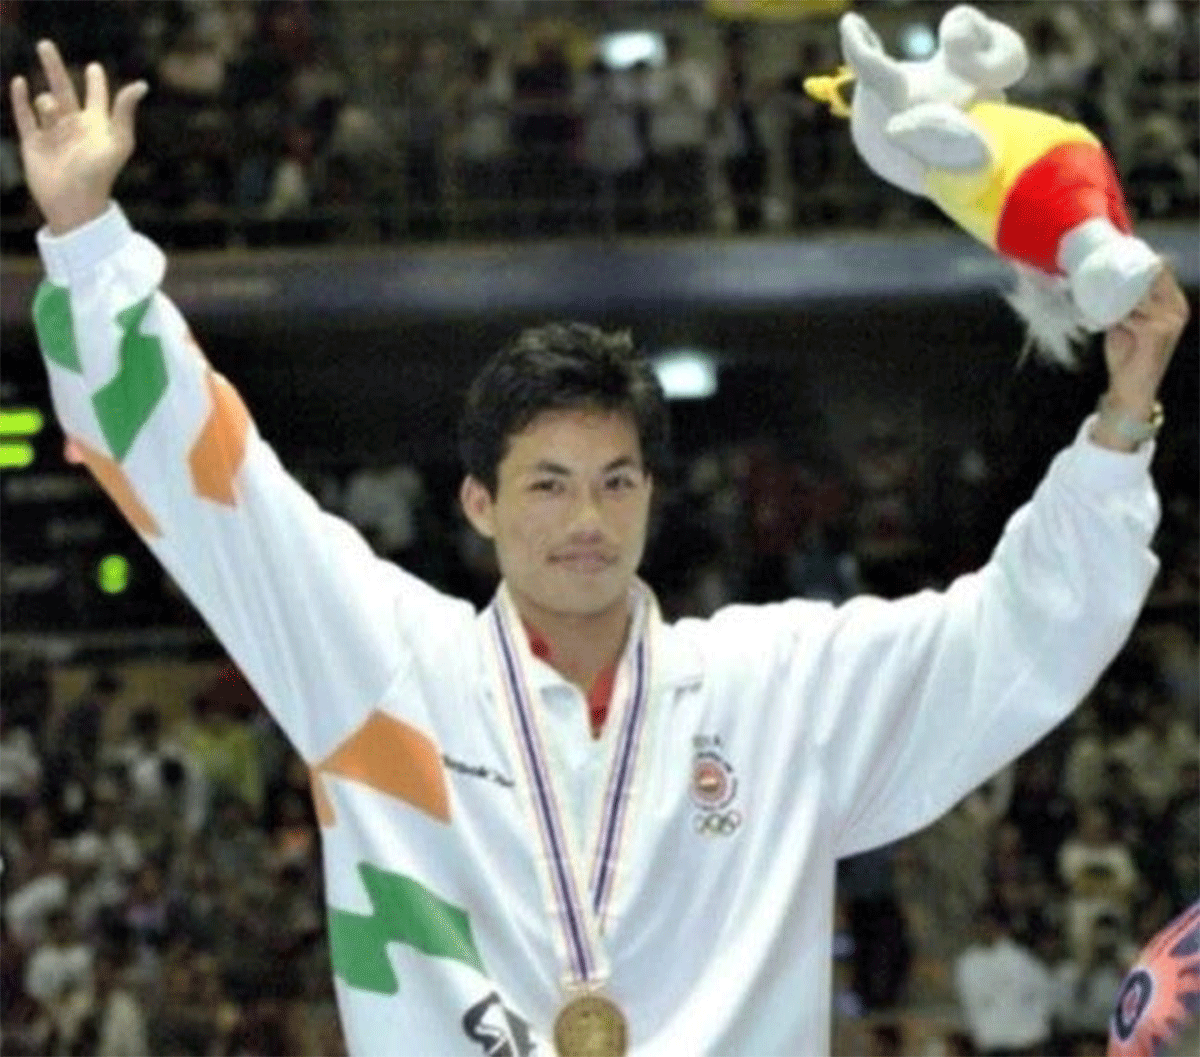 Dingko Singh won the gold medal at the 1998 Asian Games, the first in 16 years